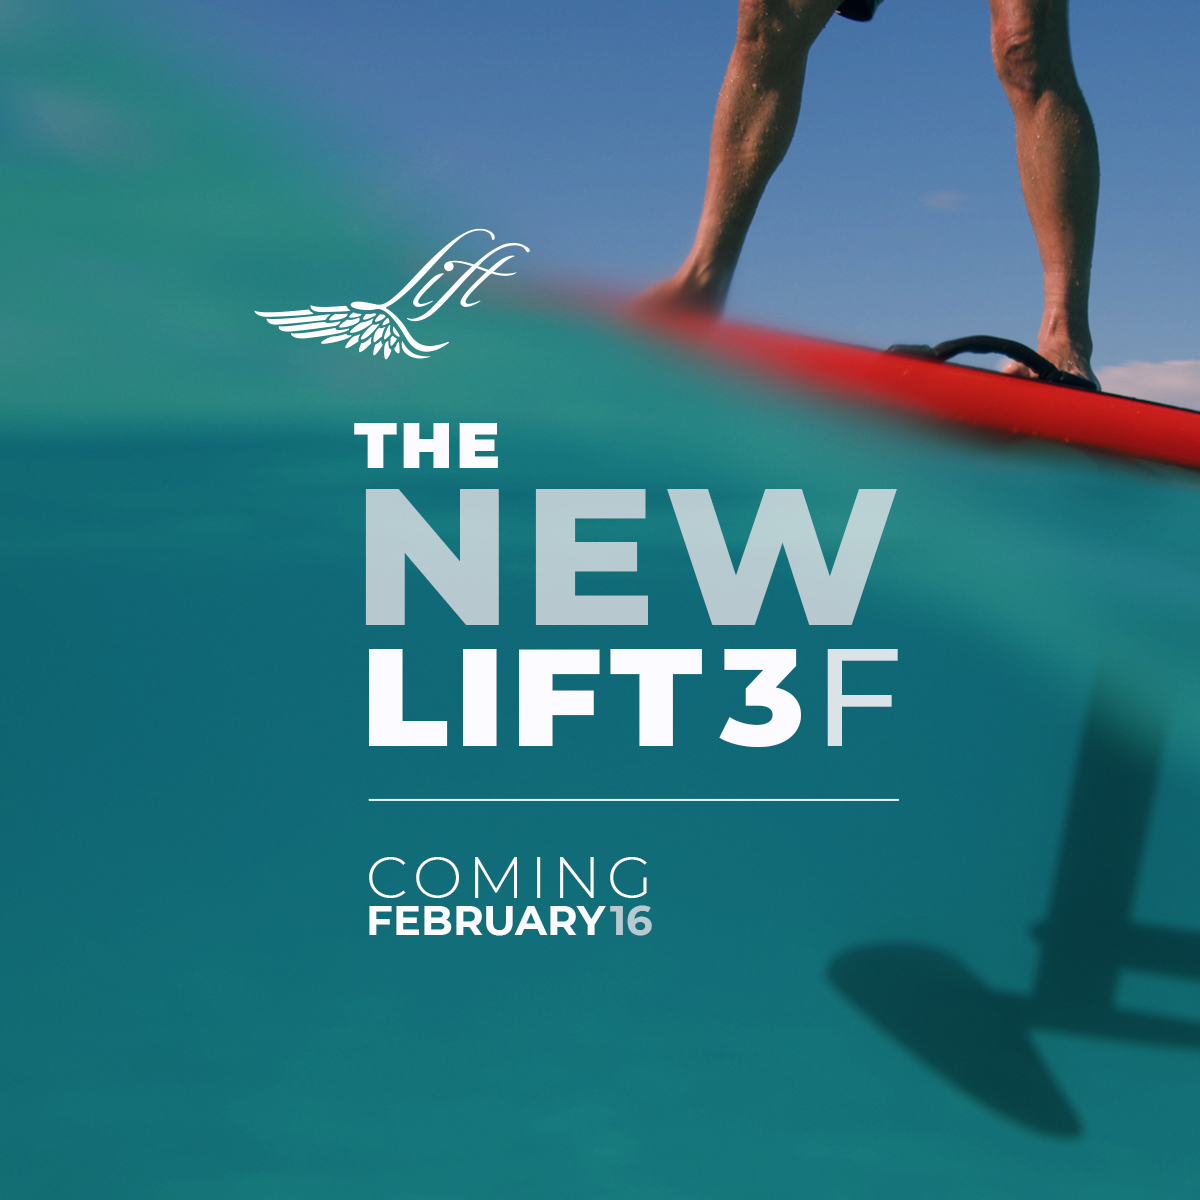 New Lift 3 F Launched